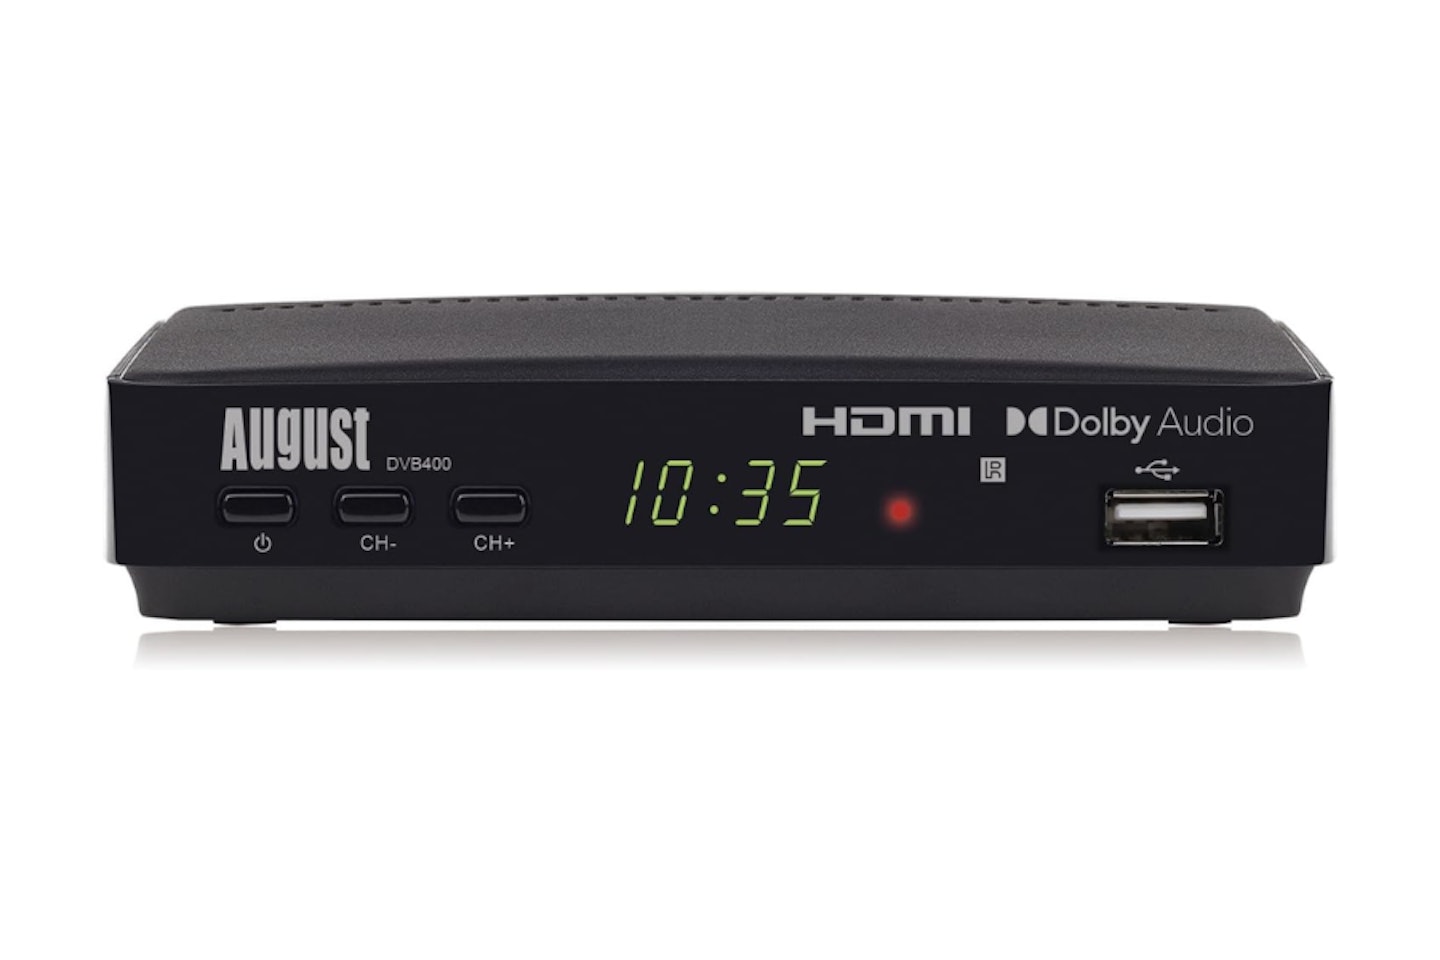 August DVB400 Freeview HD TV Set Top Box Recorder - possibly the best freeview box